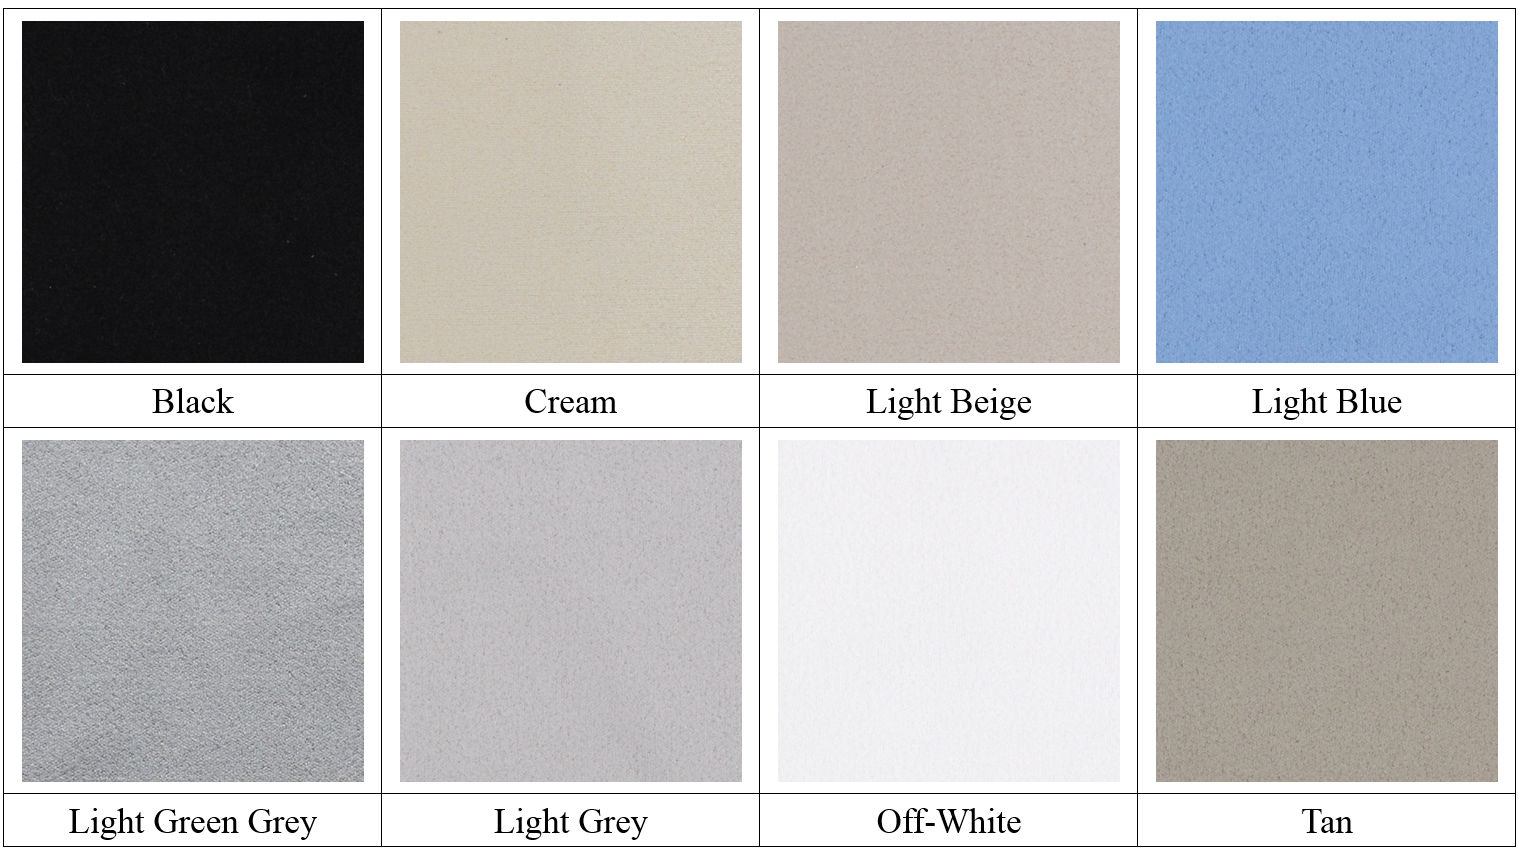 Double faced microsuede cleaning and polishing cloth color chart